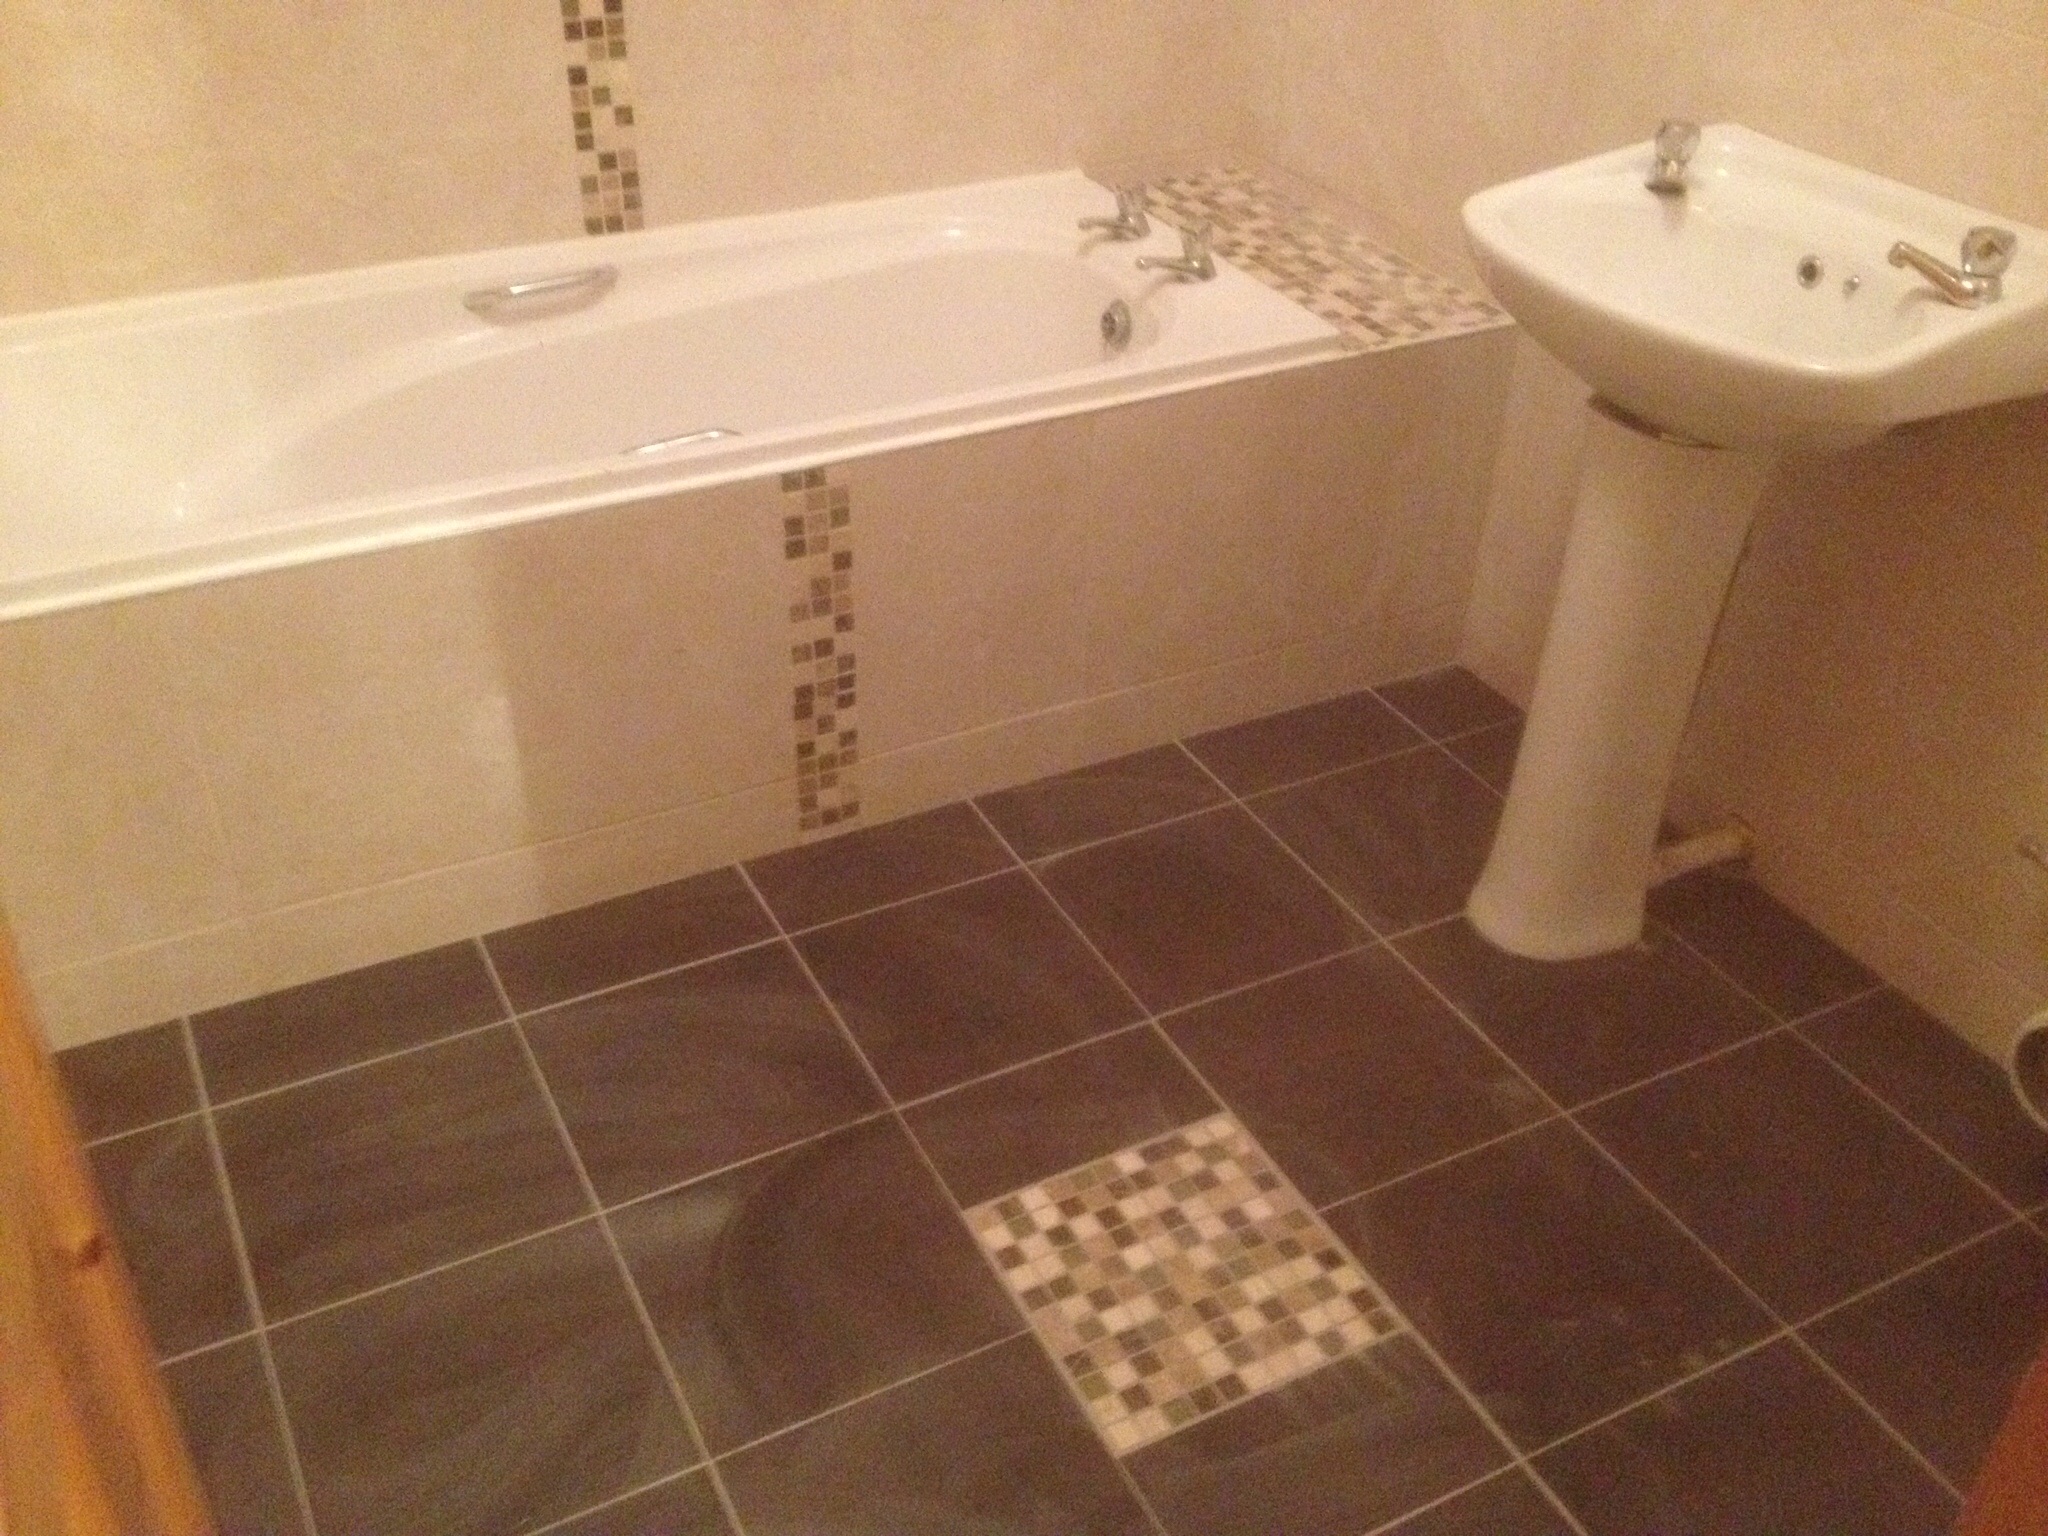  Tiling by pat lawlor for a professional Service call pat @ 0873966044}